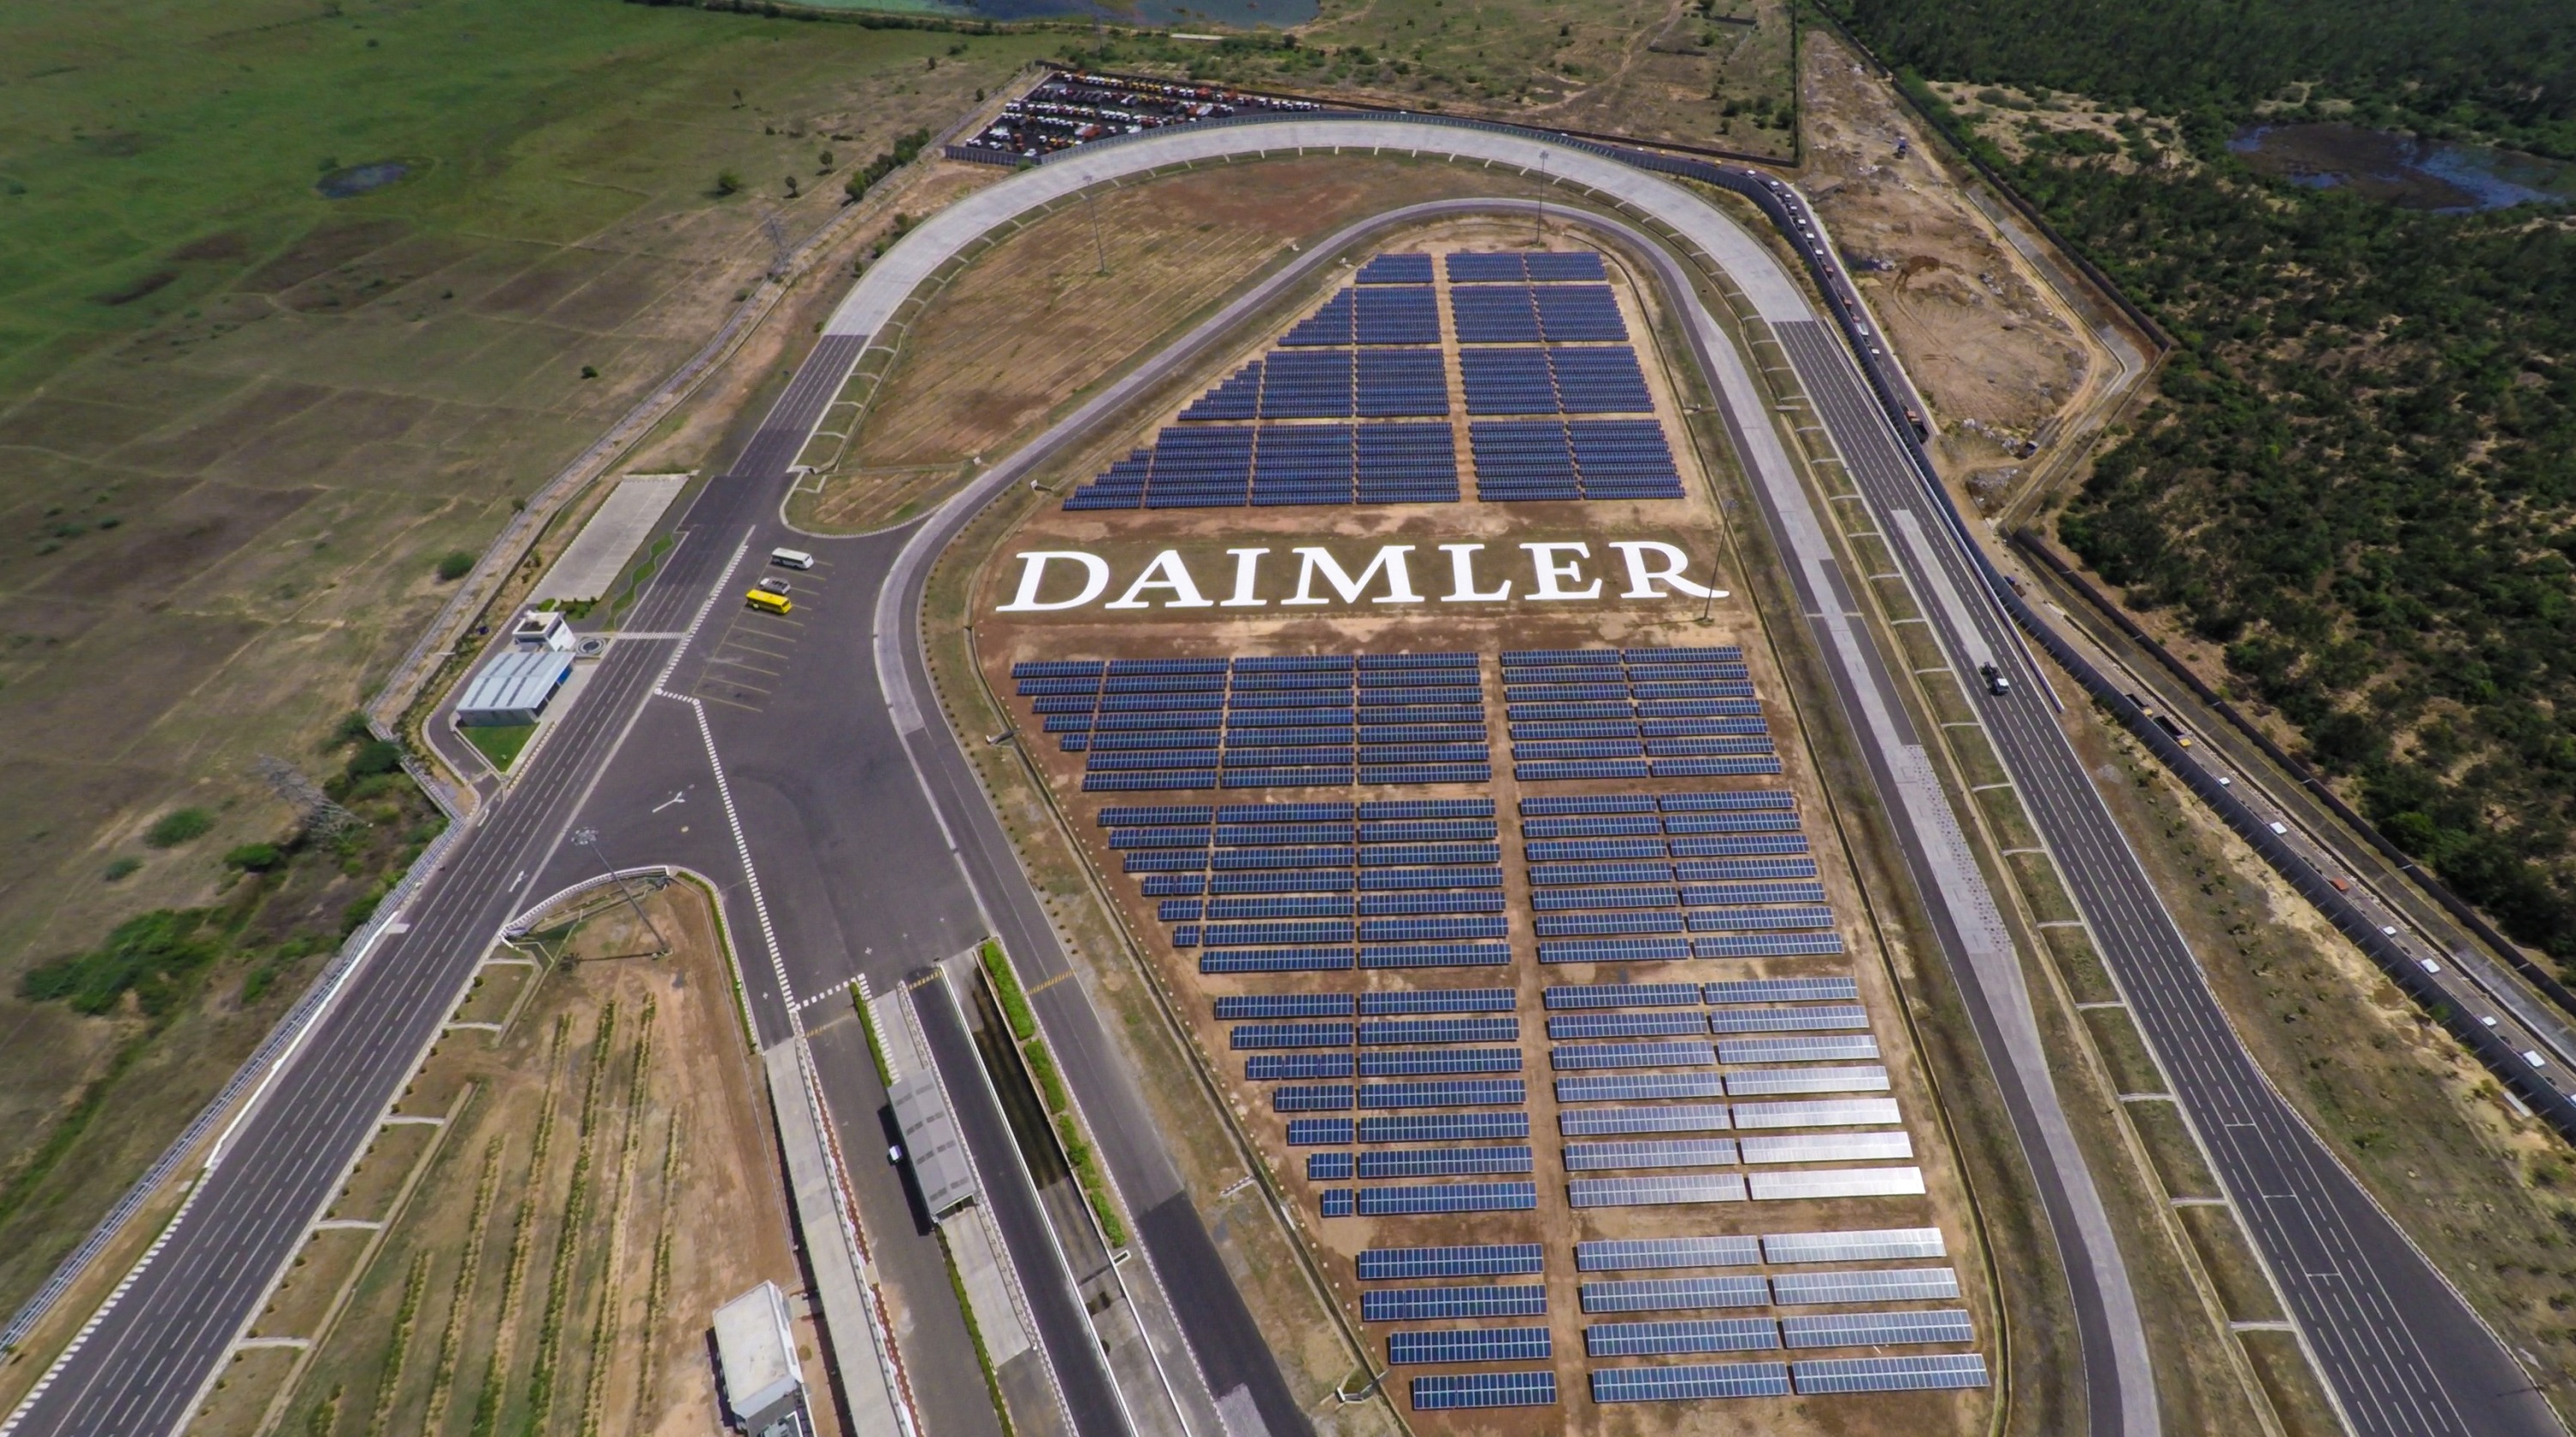 Daimler Truck Completes a Successful Decade in India; aims at 100% carbon-free Operations in Oragadam, India by 2025